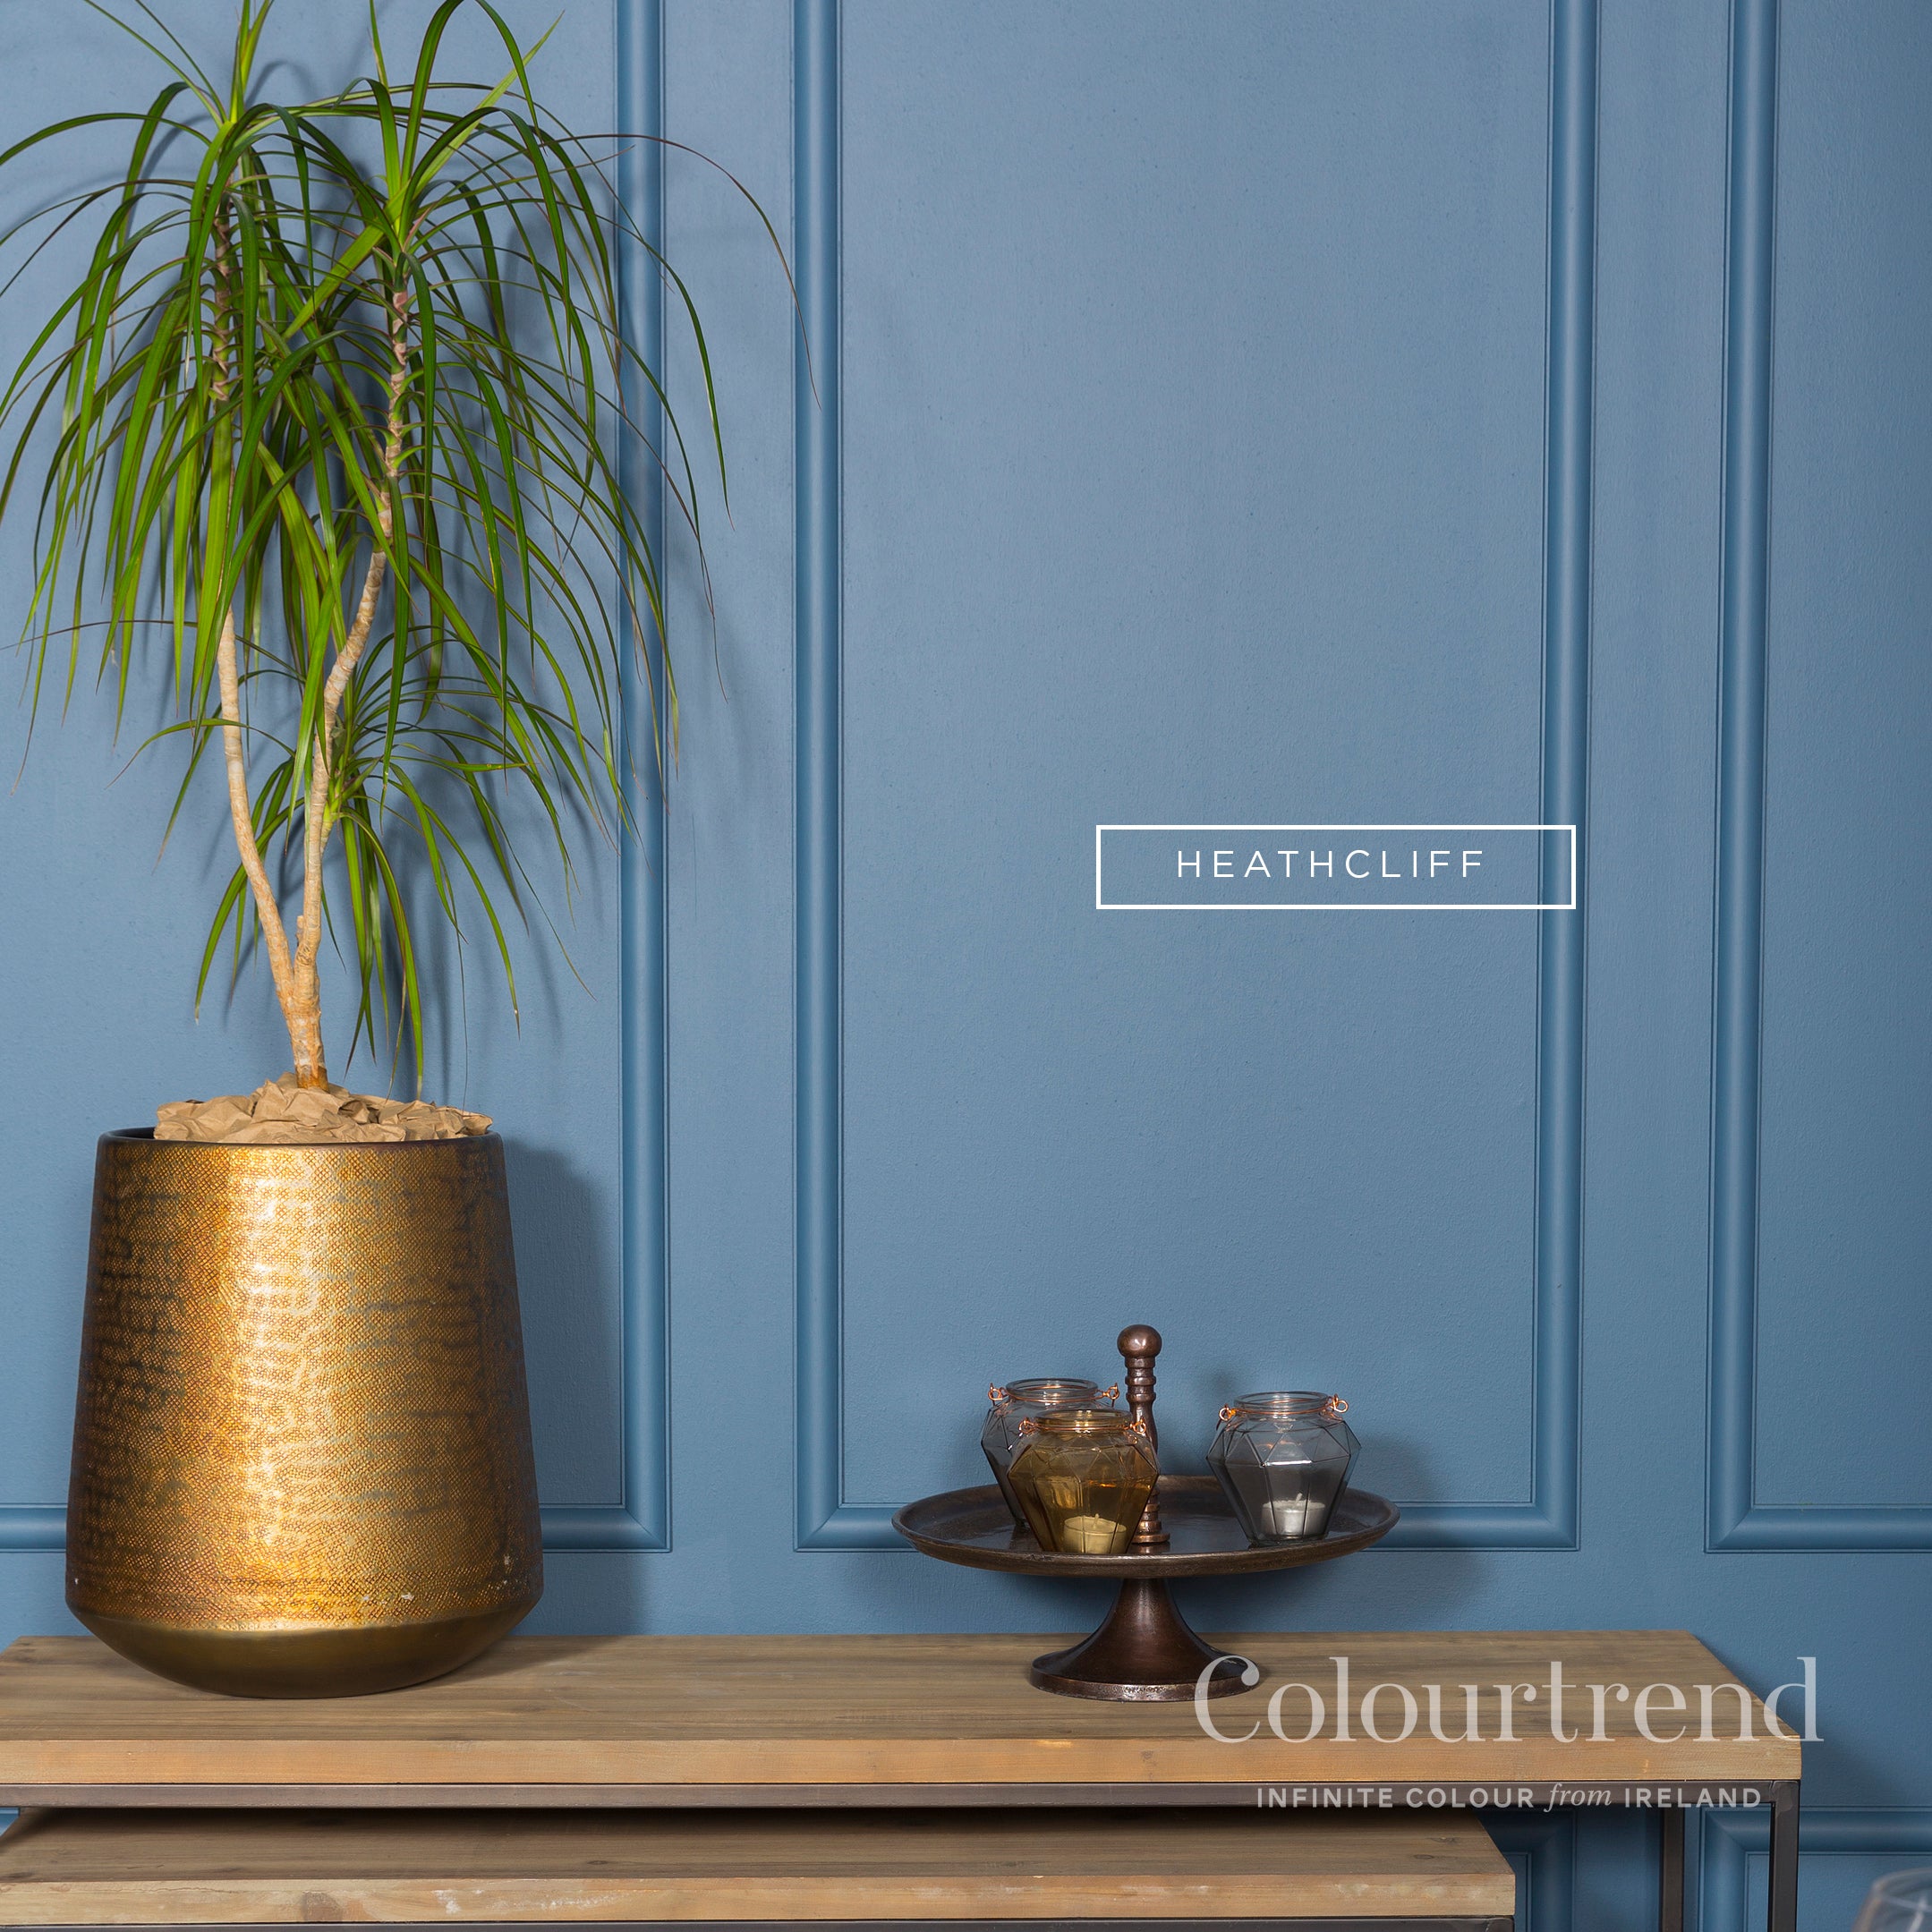 Colourtrend Heathcliff | Same Day Dublin Delivery Weirs of Baggot St